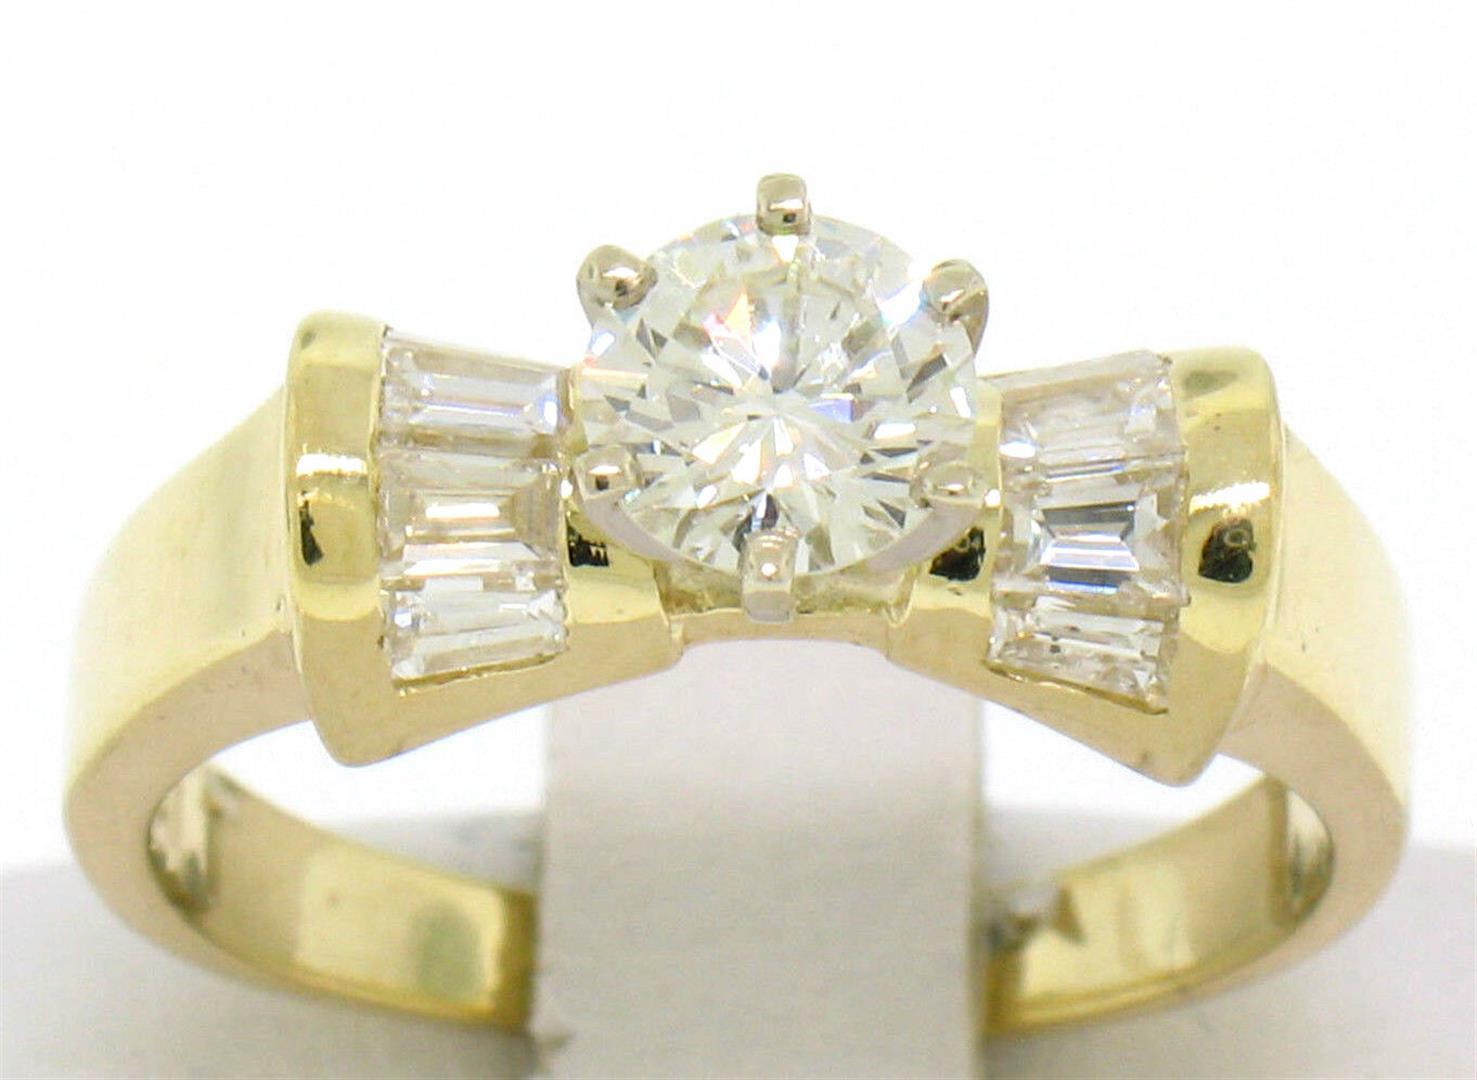 14k Yellow Gold 0.91 ctw Round Diamond Solitaire Channel Baguette Engagement Rin